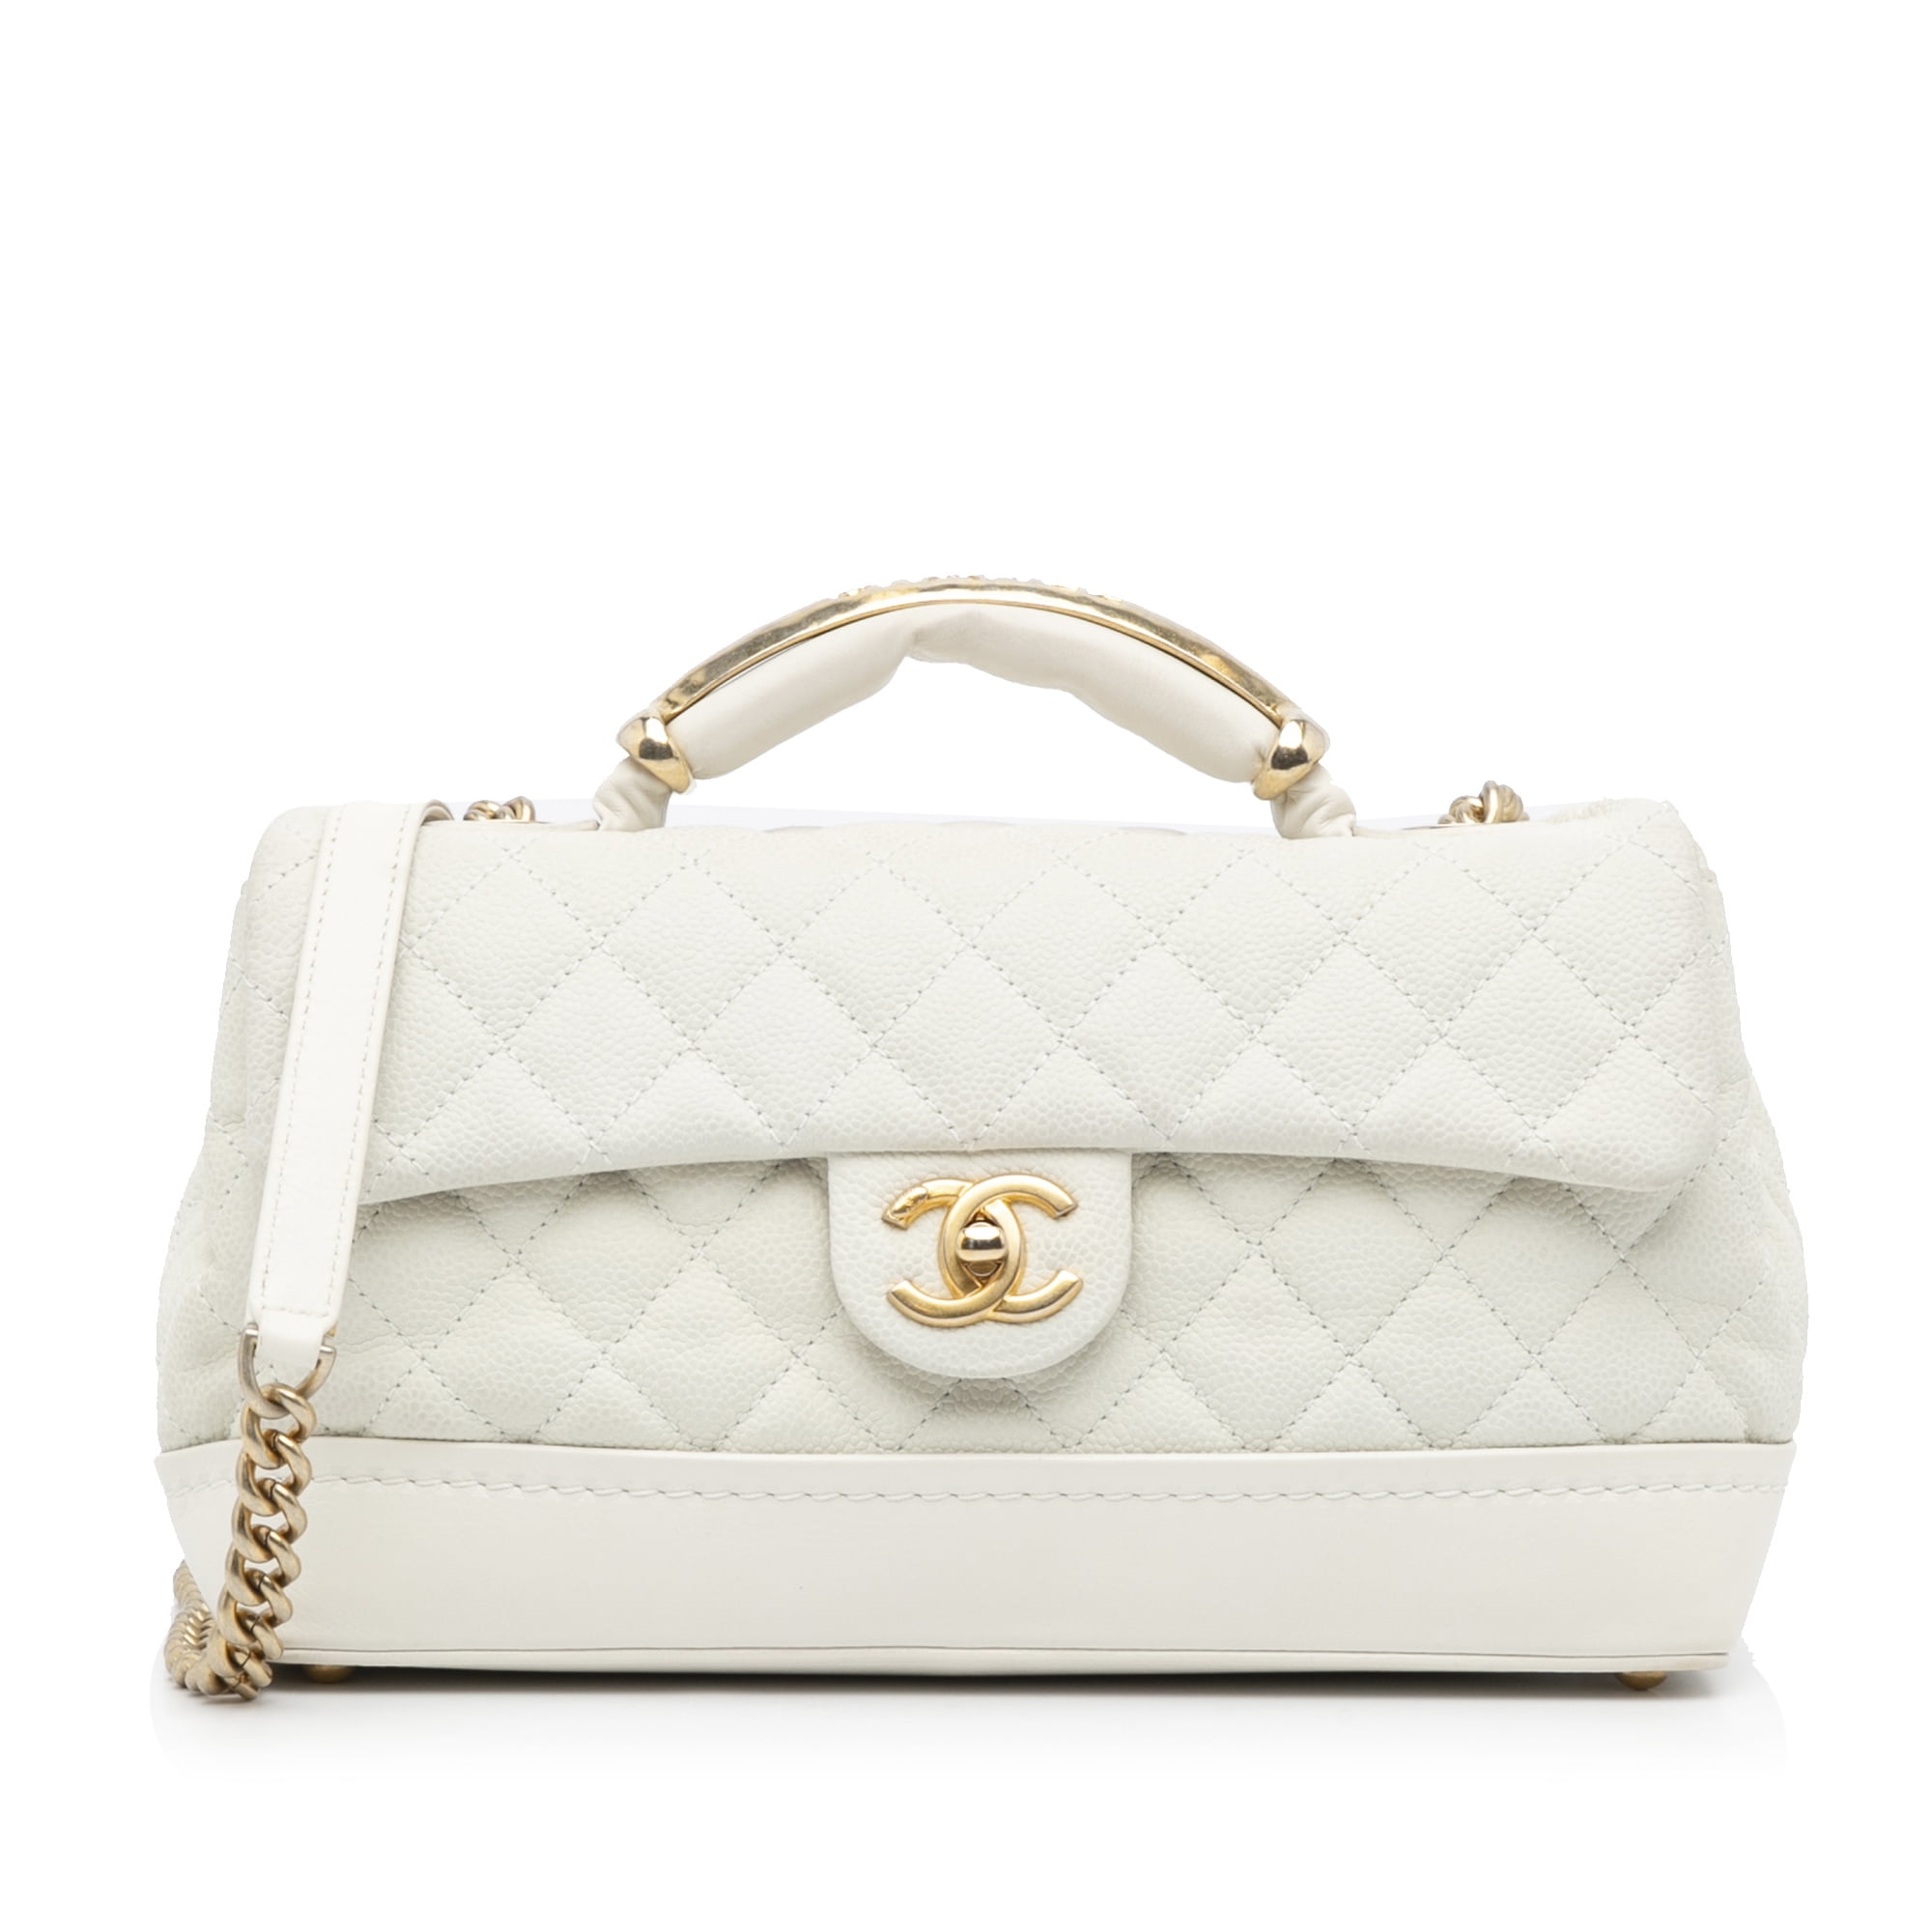 Chanel - Authenticated Handbag - Leather White for Women, Very Good Condition